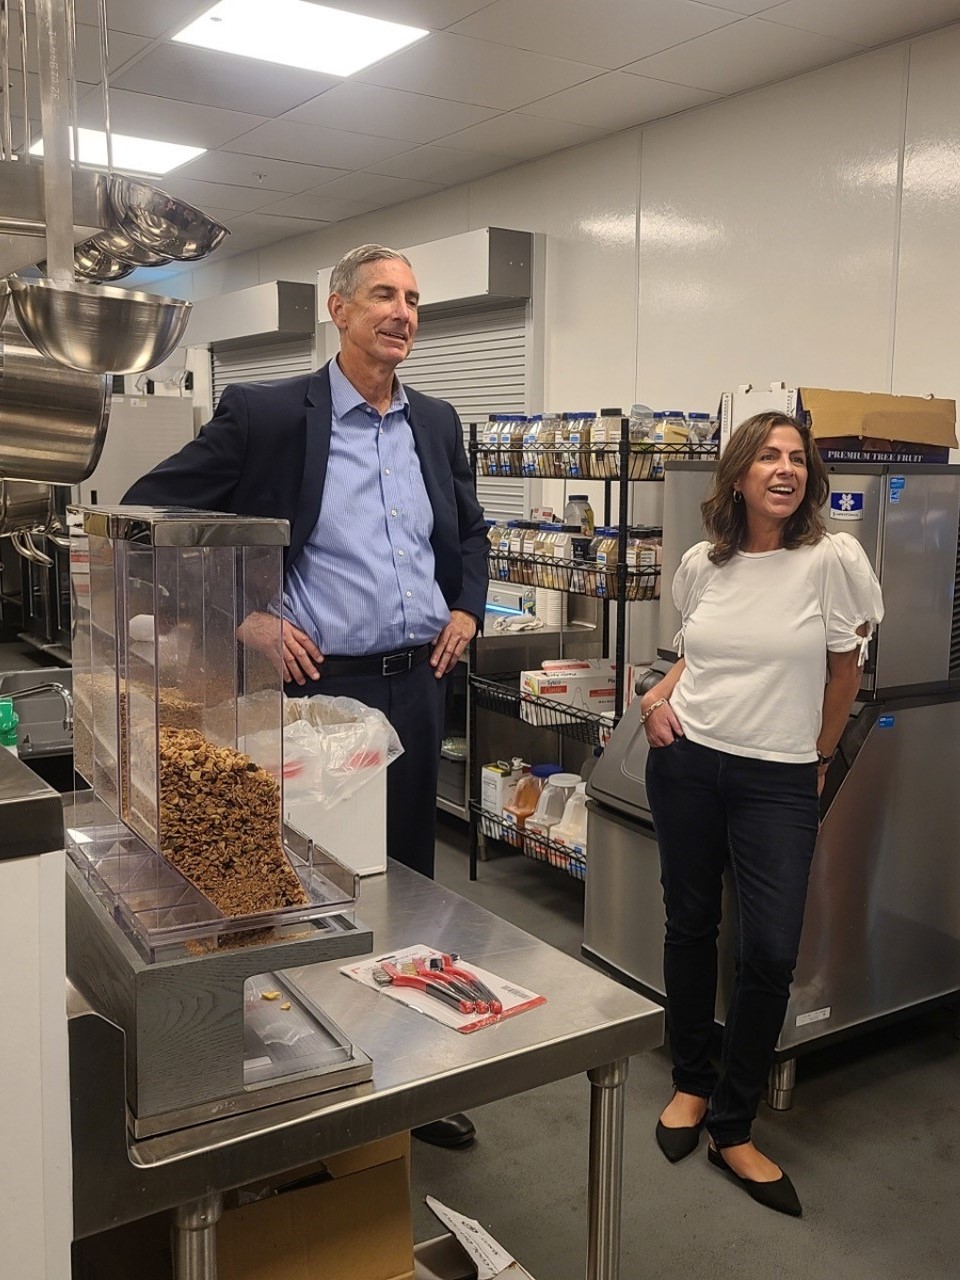 Pictured Left to Right: San Mateo County Executive Mike Callagy and Assemblymember Diane Papan in the kitchen of the San Mateo County Navigation Center